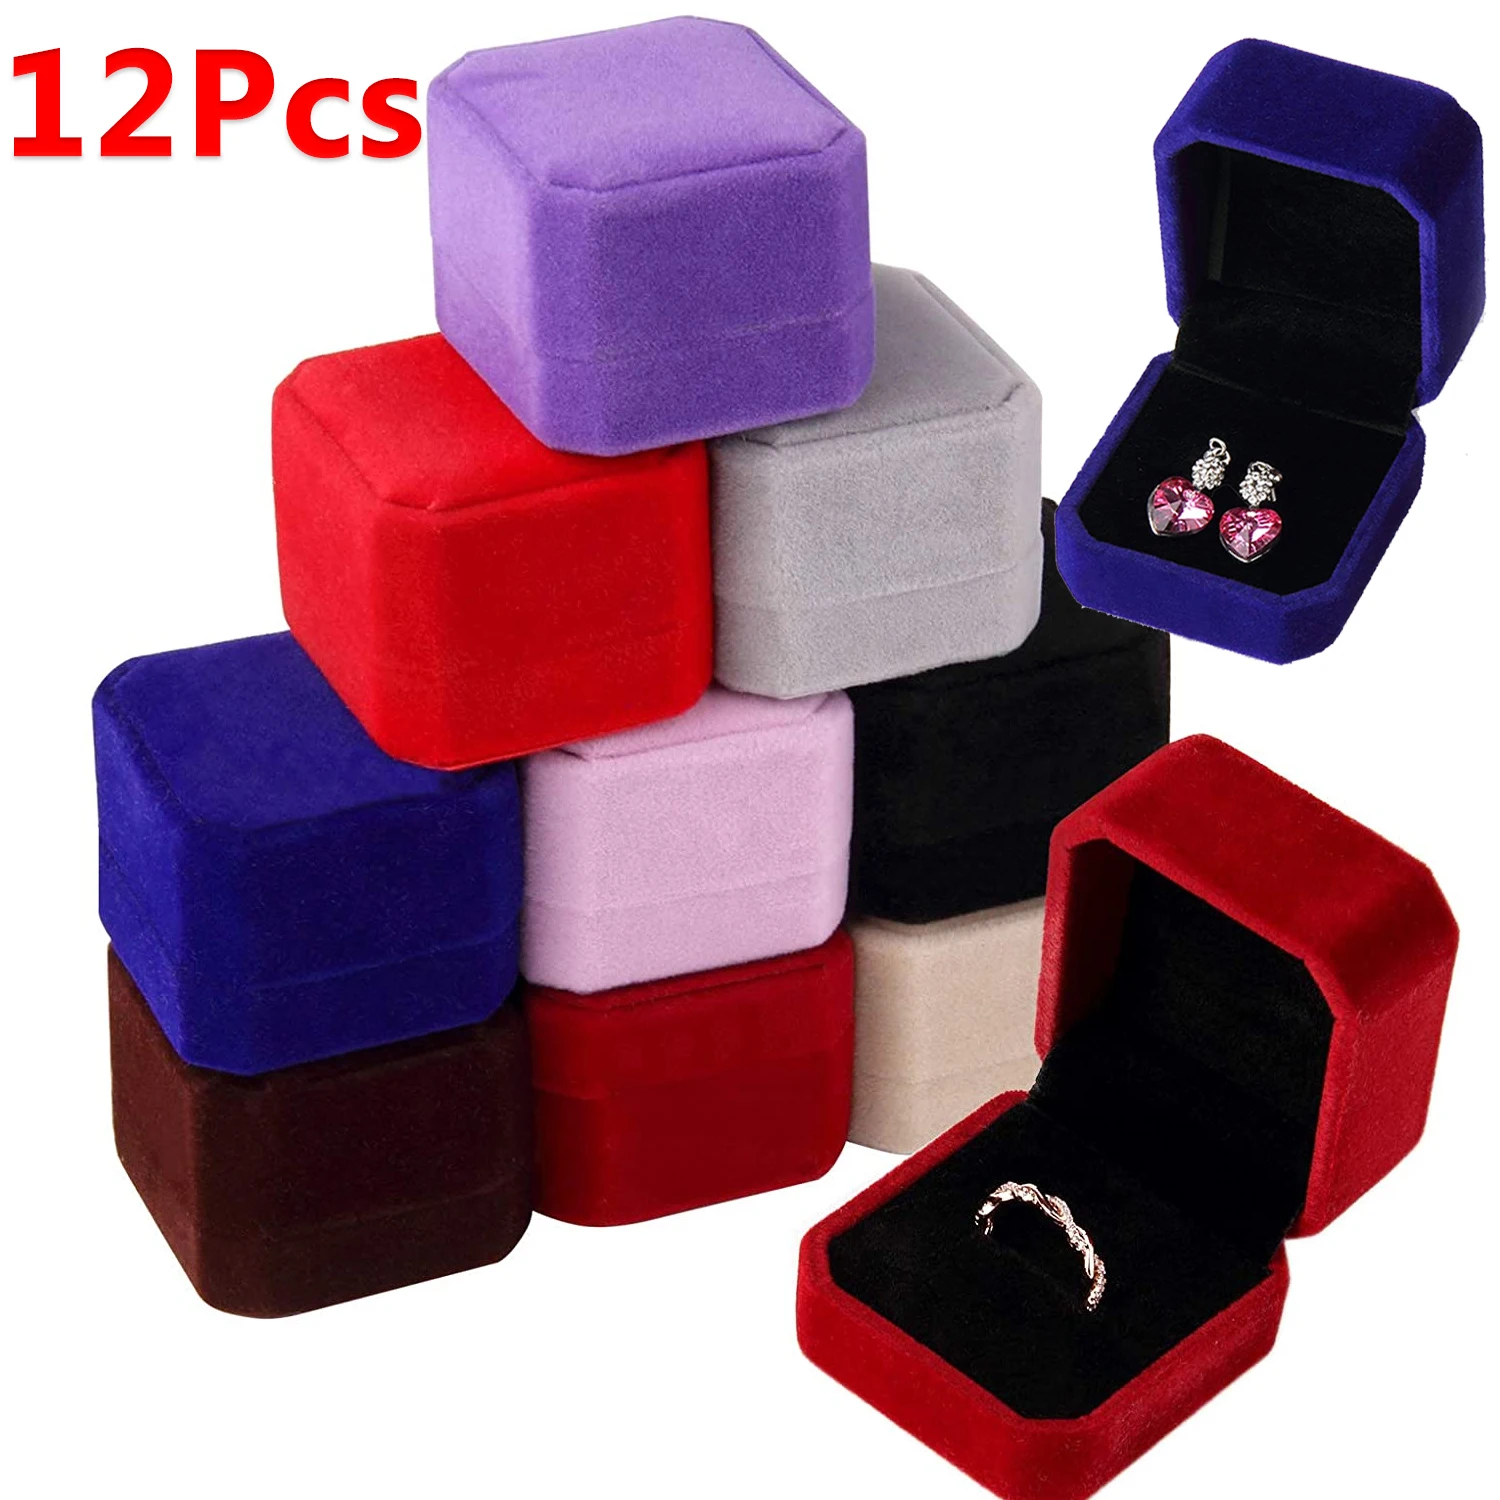 

12Pcs Square Velvet Ring Box Engagement Wedding Jewelry Necklace Earring Storage Organizer Gift Box Holder for Lover Jewellery